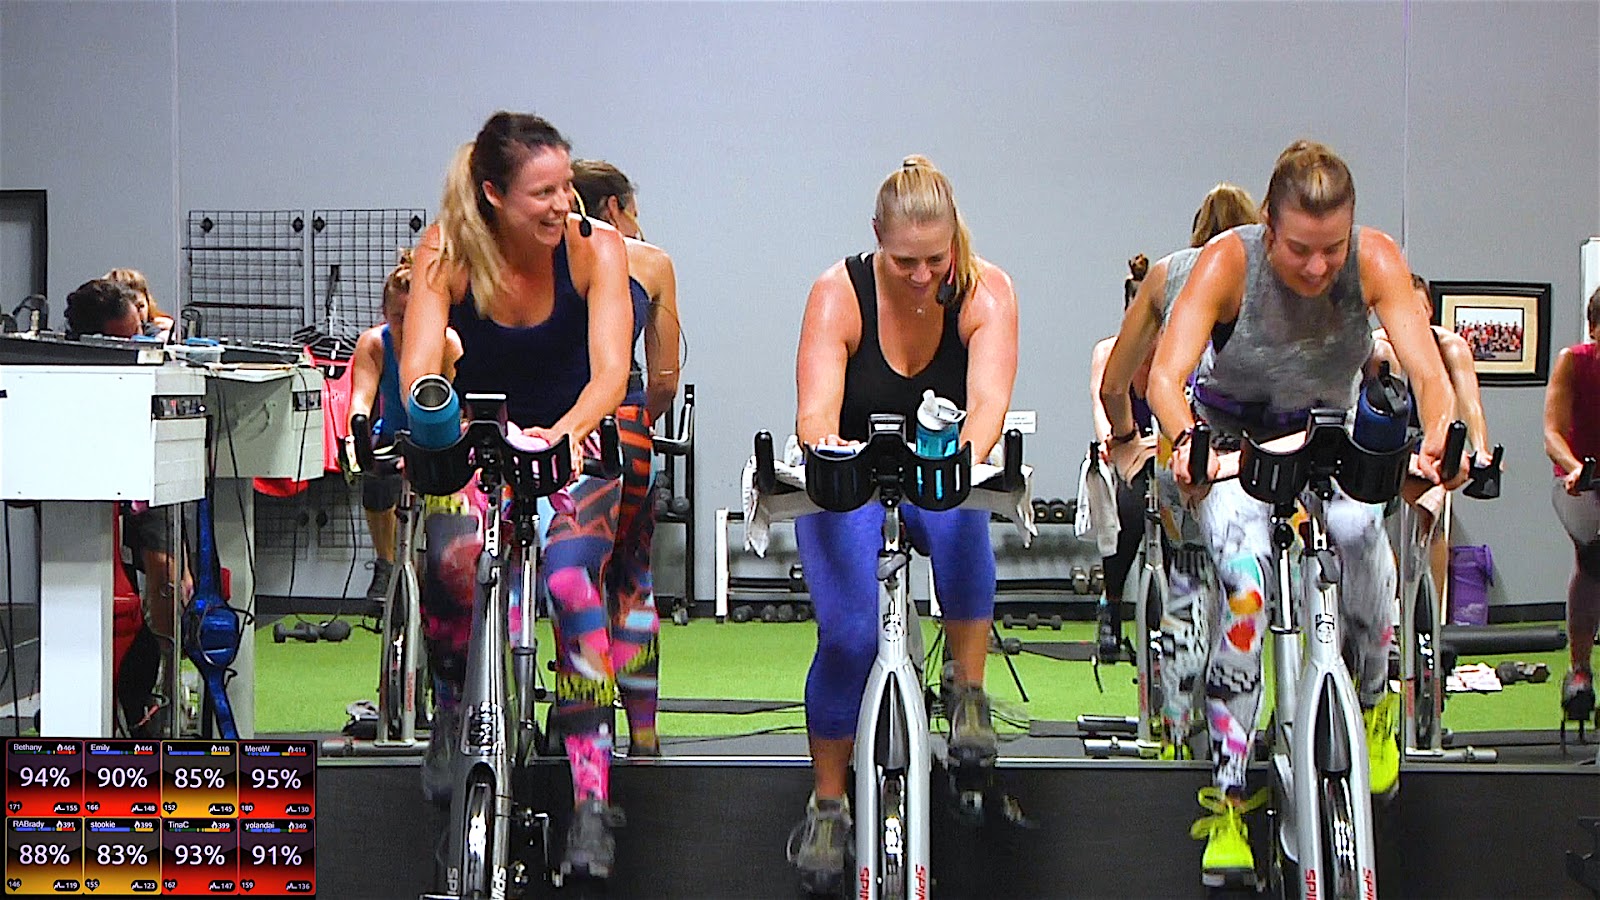 Image from a Studio SWEAT onDemand Spin class workout